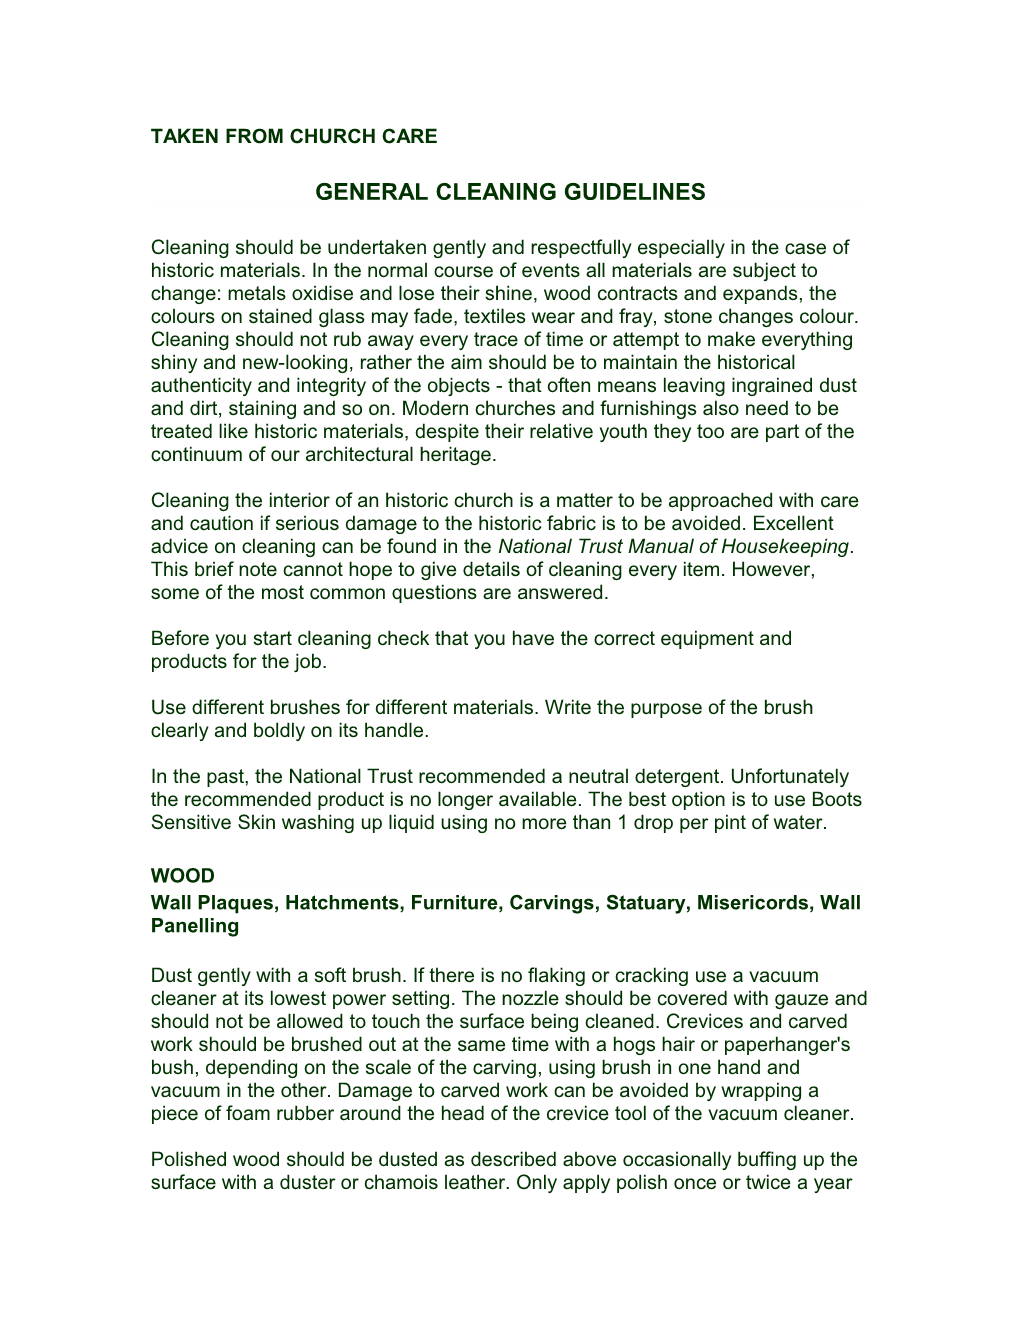 General Cleaning Guidelines